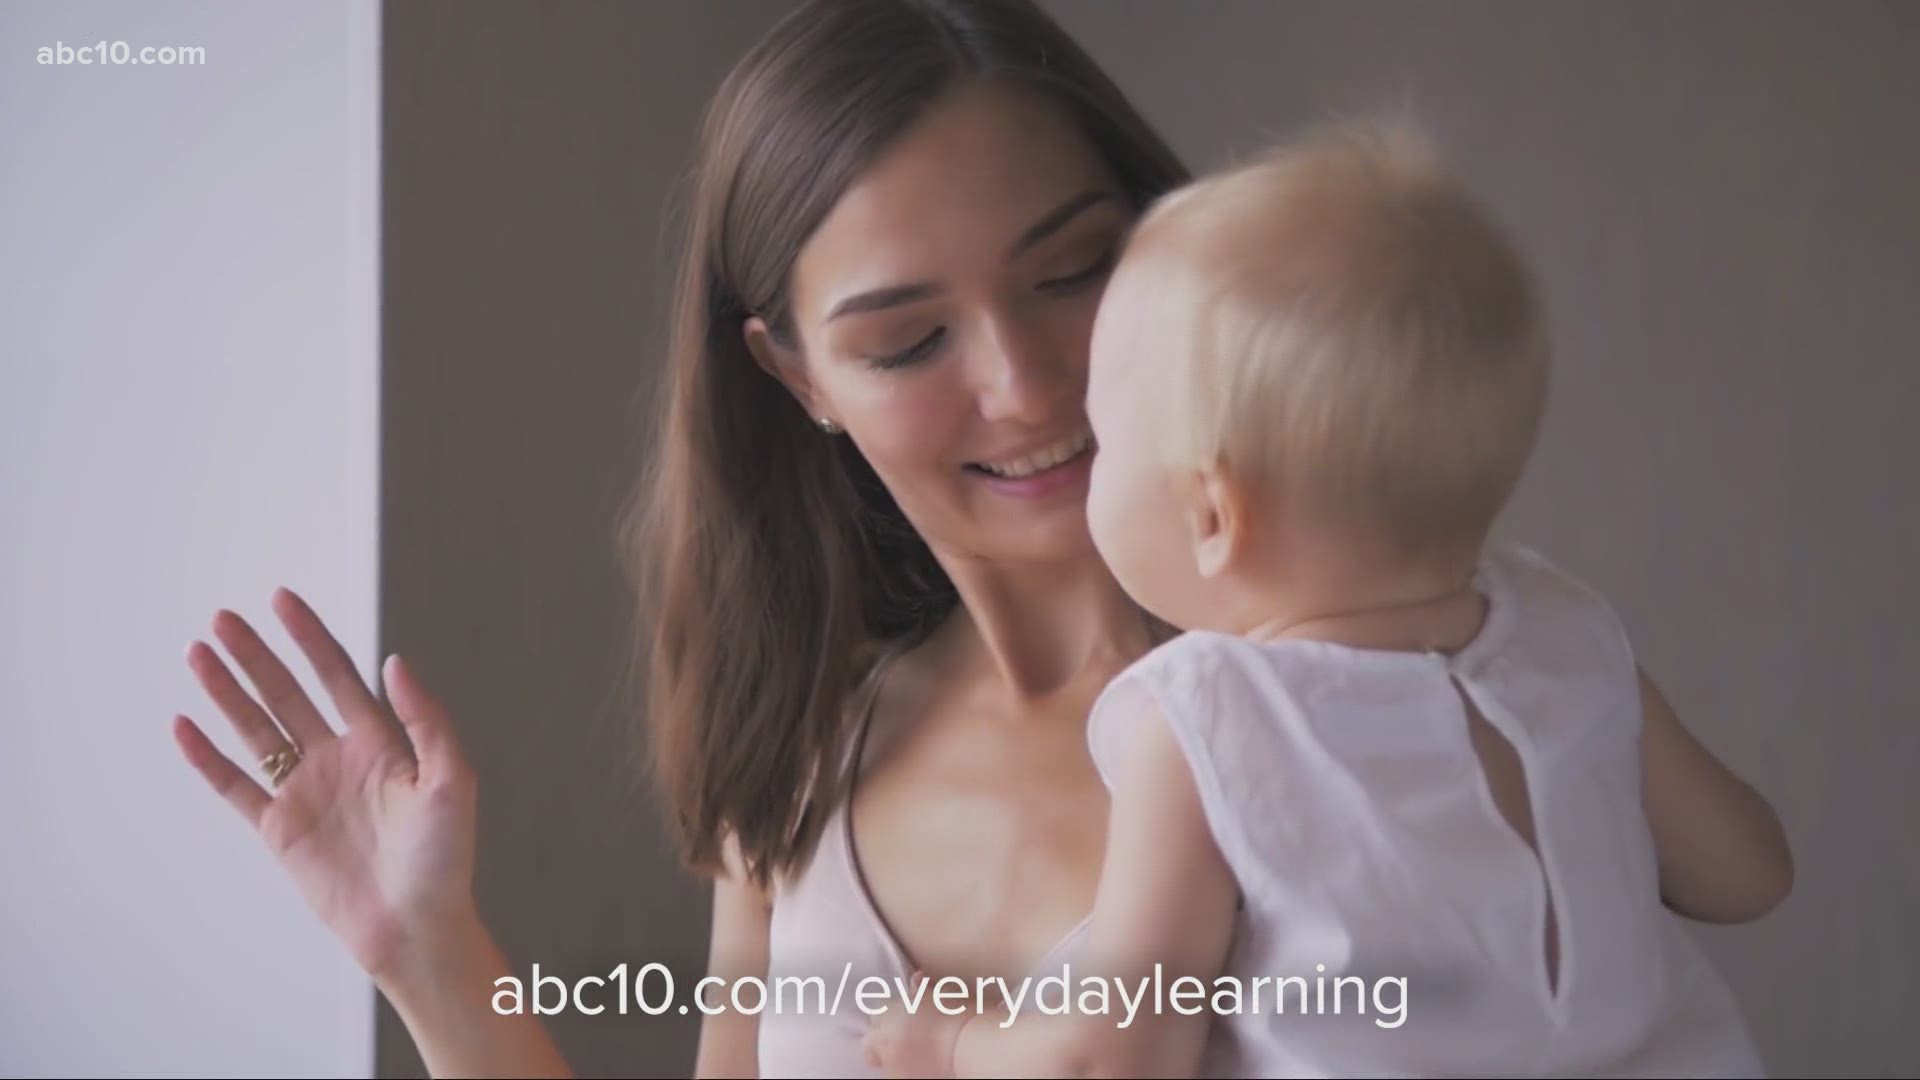 Each month, we'll share simple ways you can help your child learn every day and share resources that you can use at home. Visit abc10.com/everydaylearning for more!